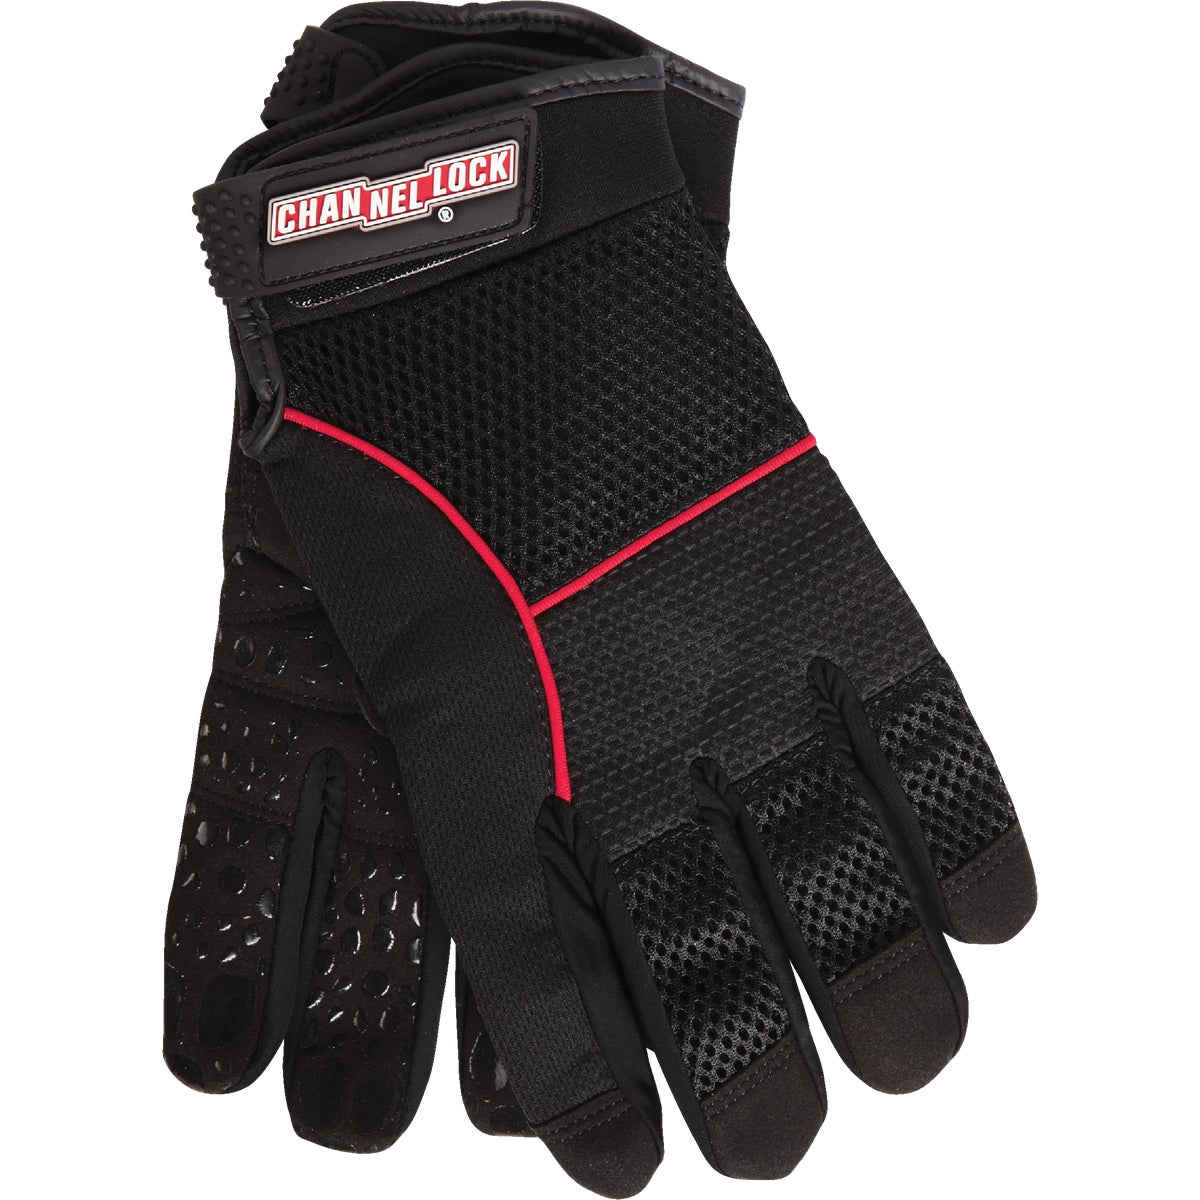 Channellock Men's 2XL Synthetic Leather Utility Grip High Performance Glove